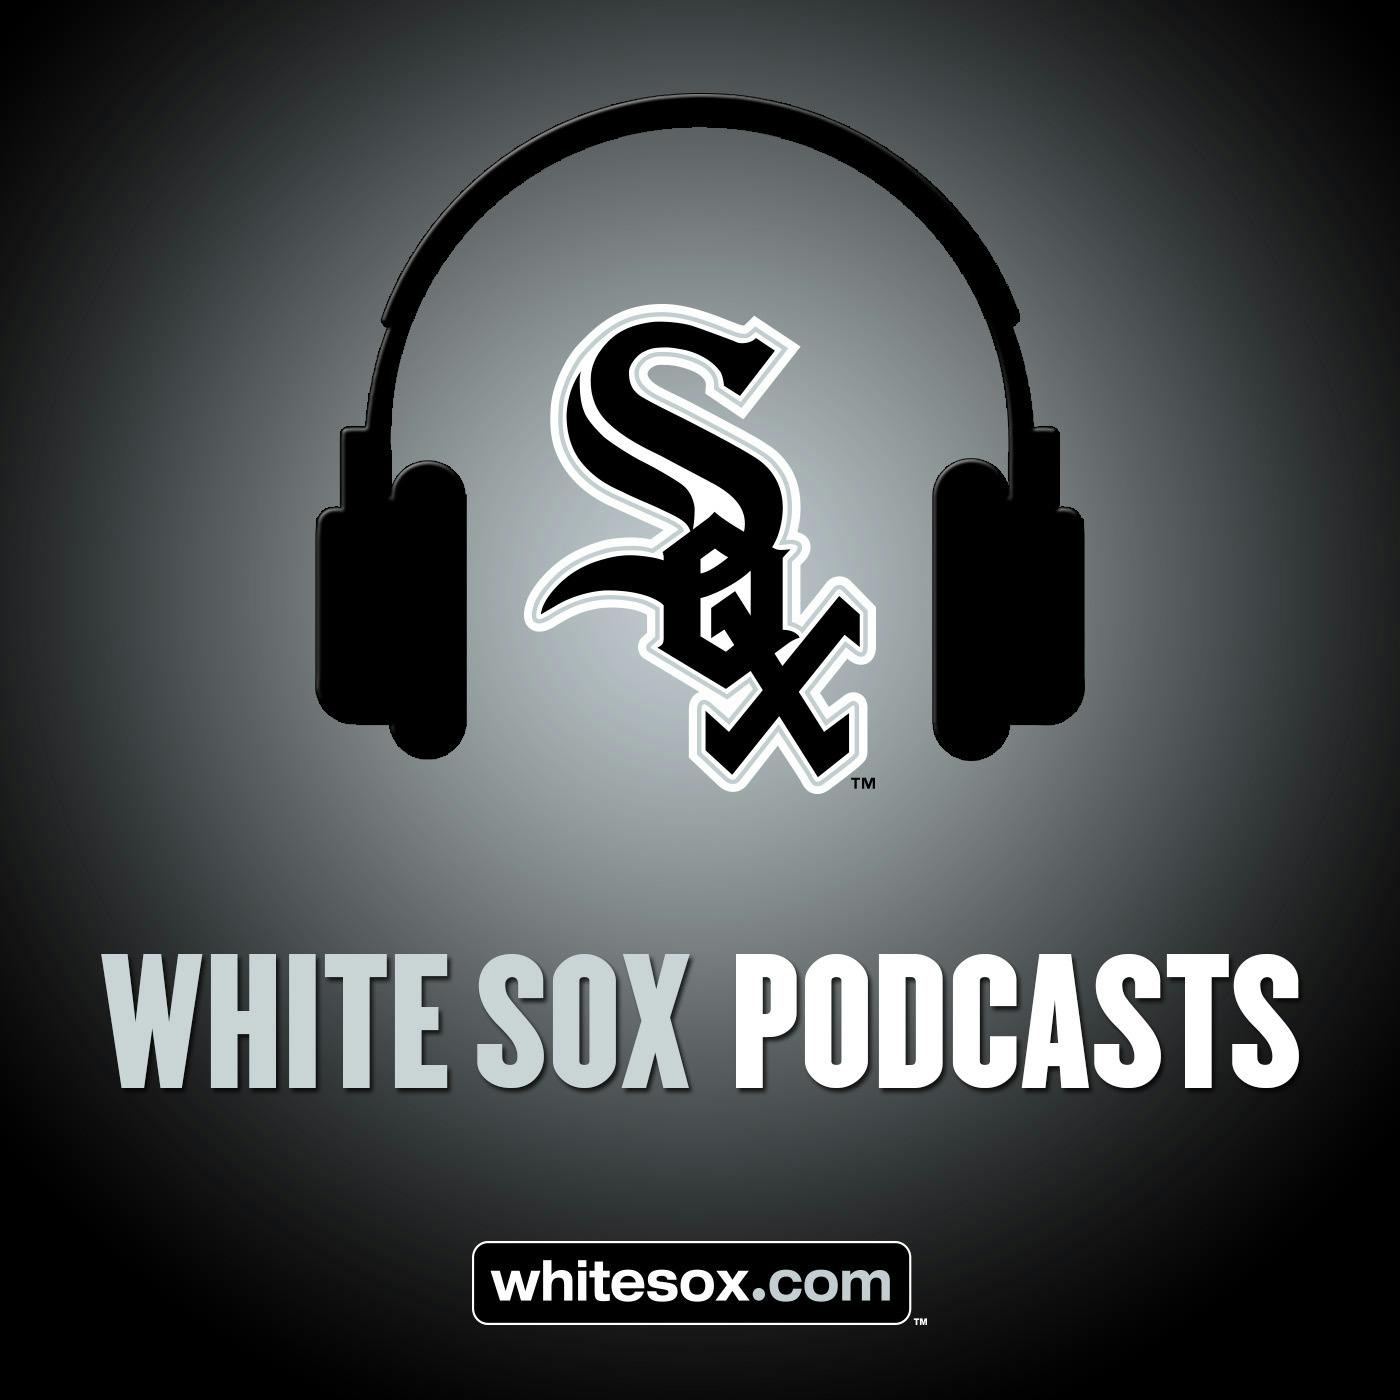 9/15/19: White Sox Weekly